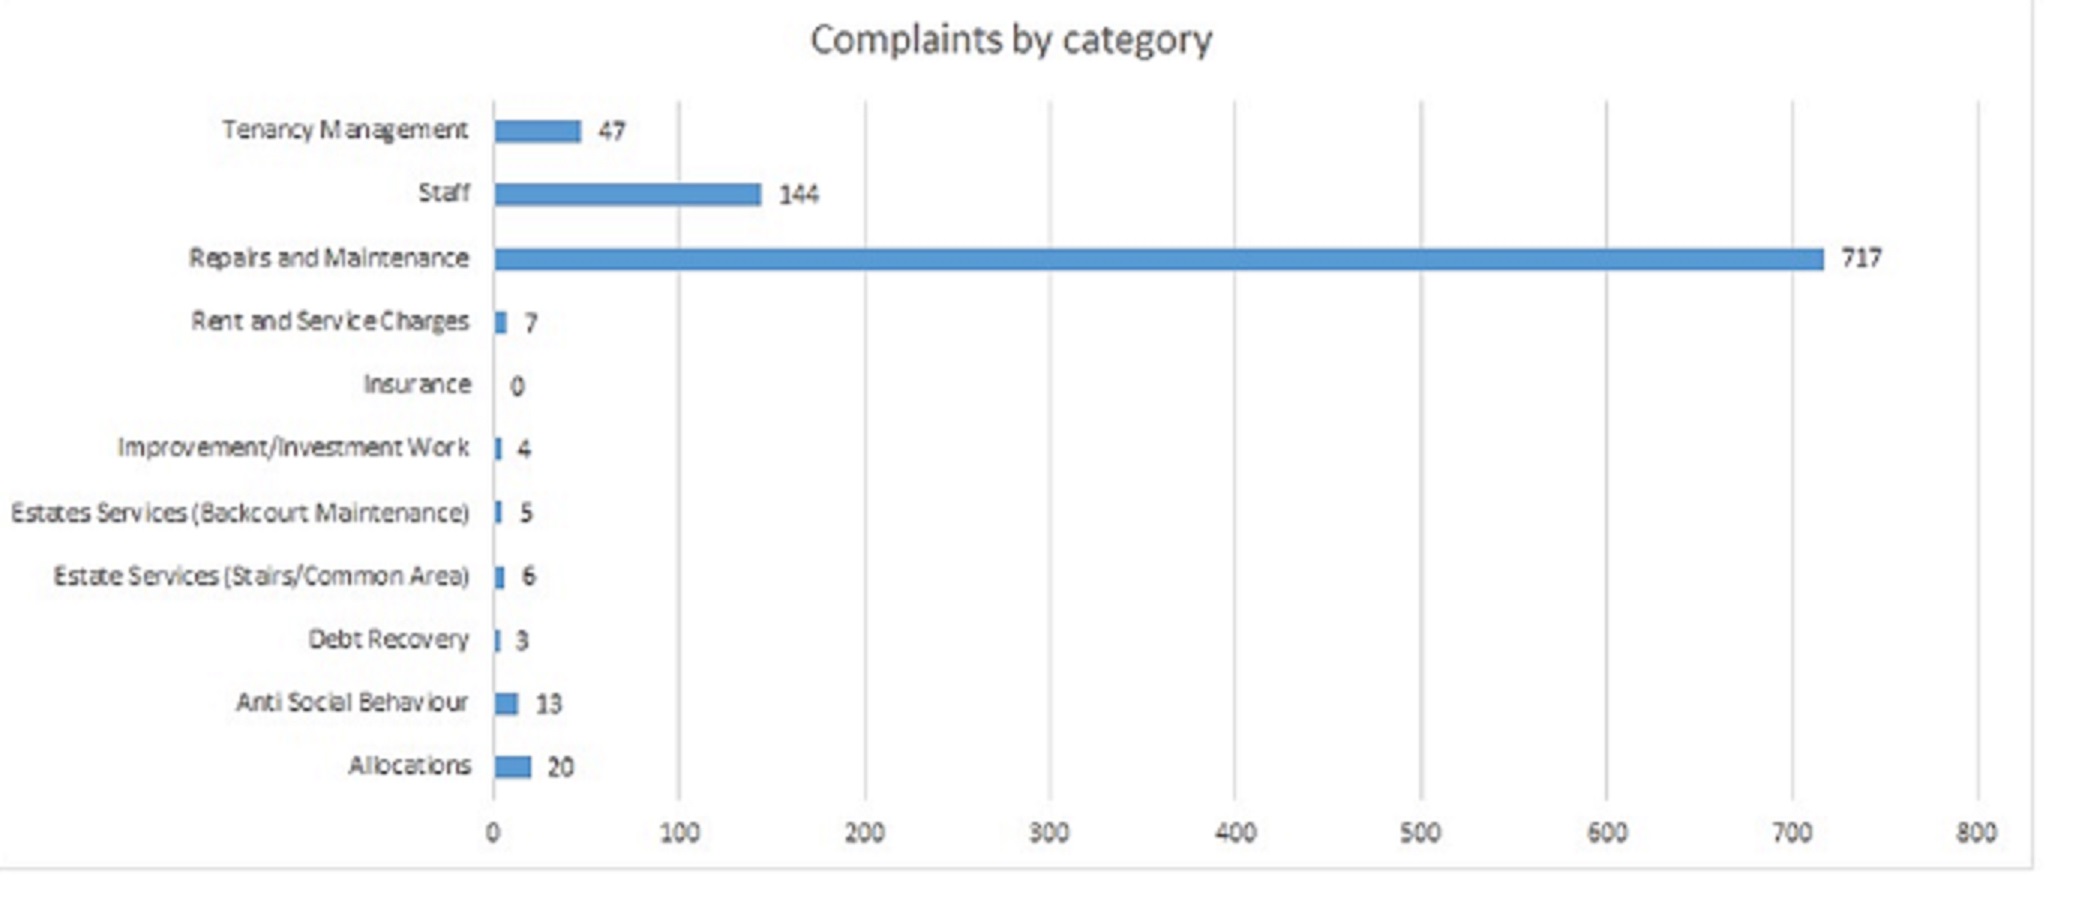 Complaints by category